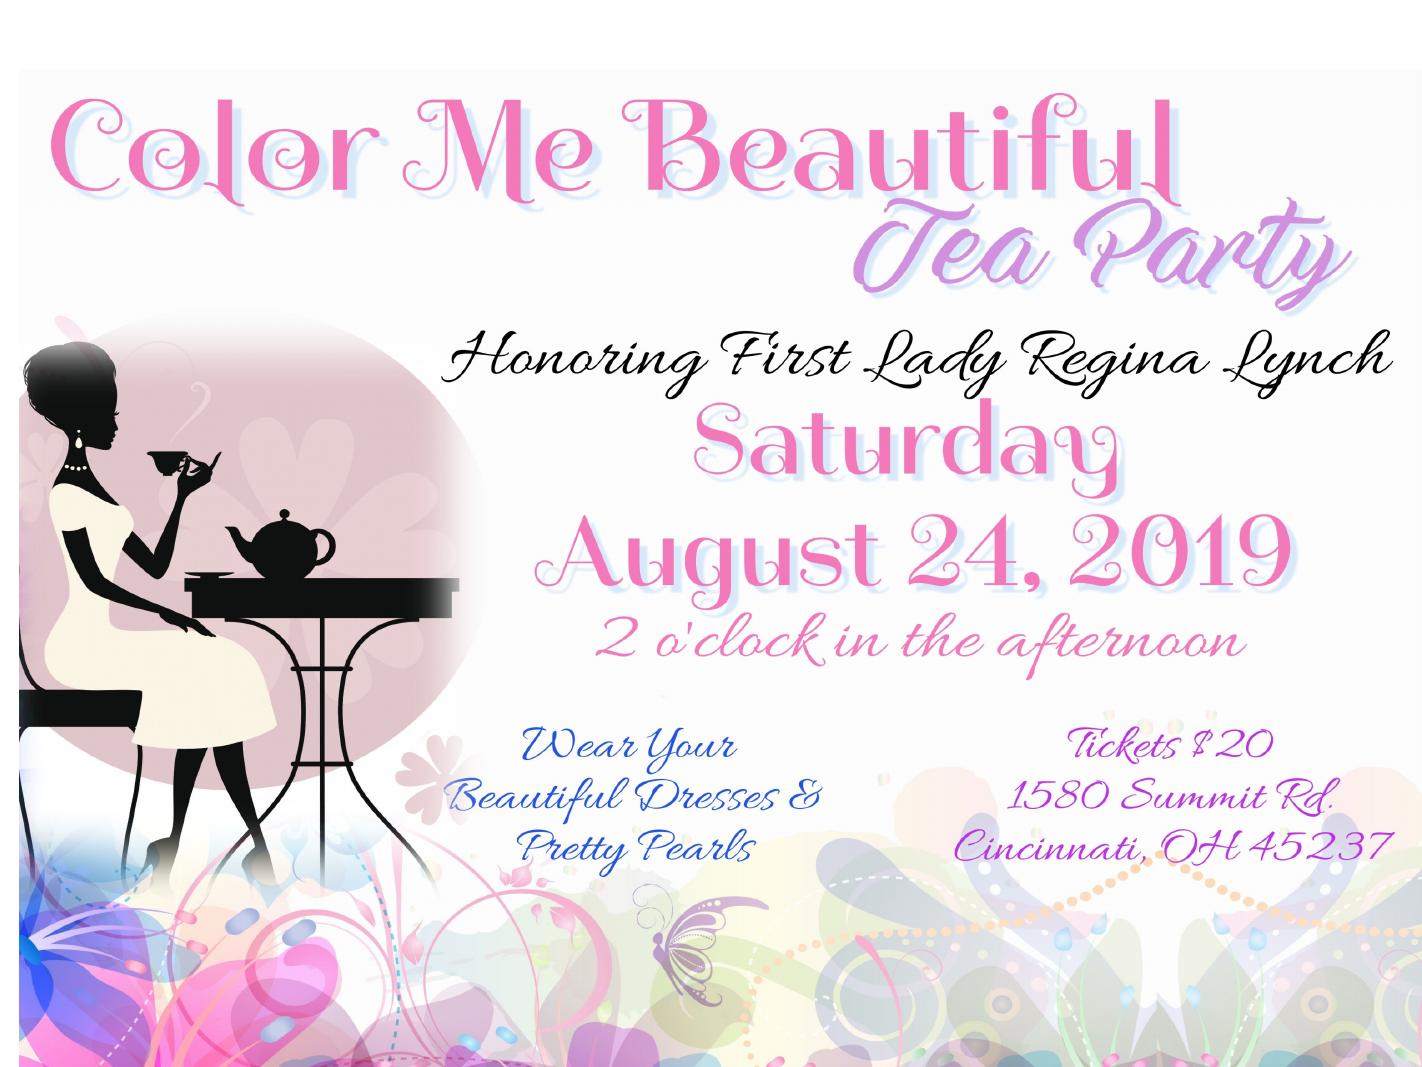 Color Me Beautiful Tea Party on Saturday August 24 2019 at 2 p.m.